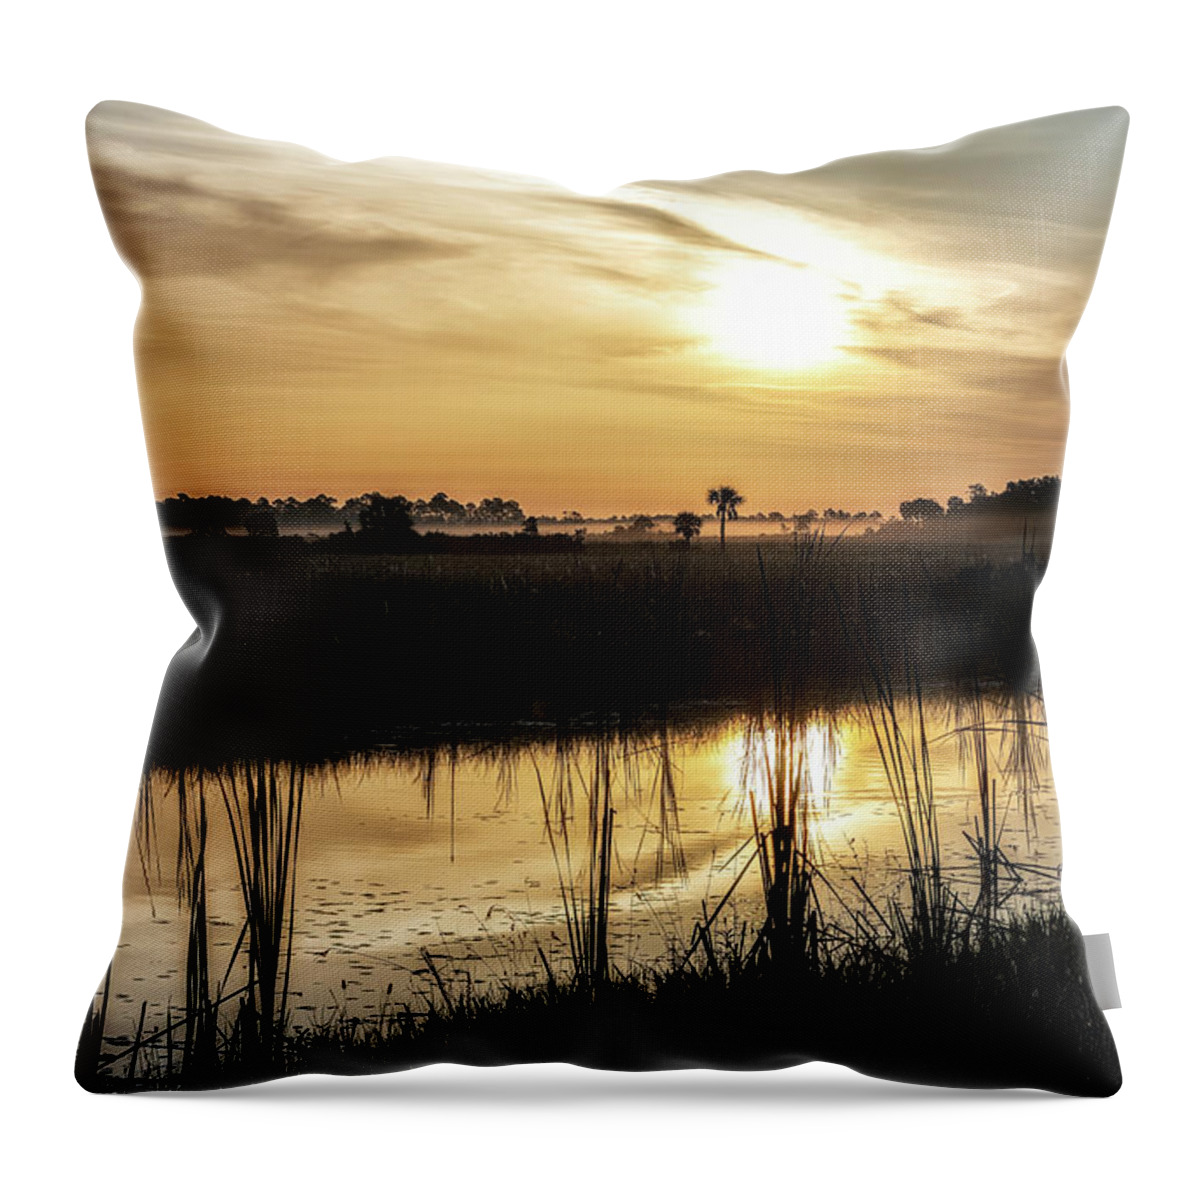 Big Cypress National Preserve Throw Pillow featuring the photograph Big Cypress Sunrise by Rudy Wilms